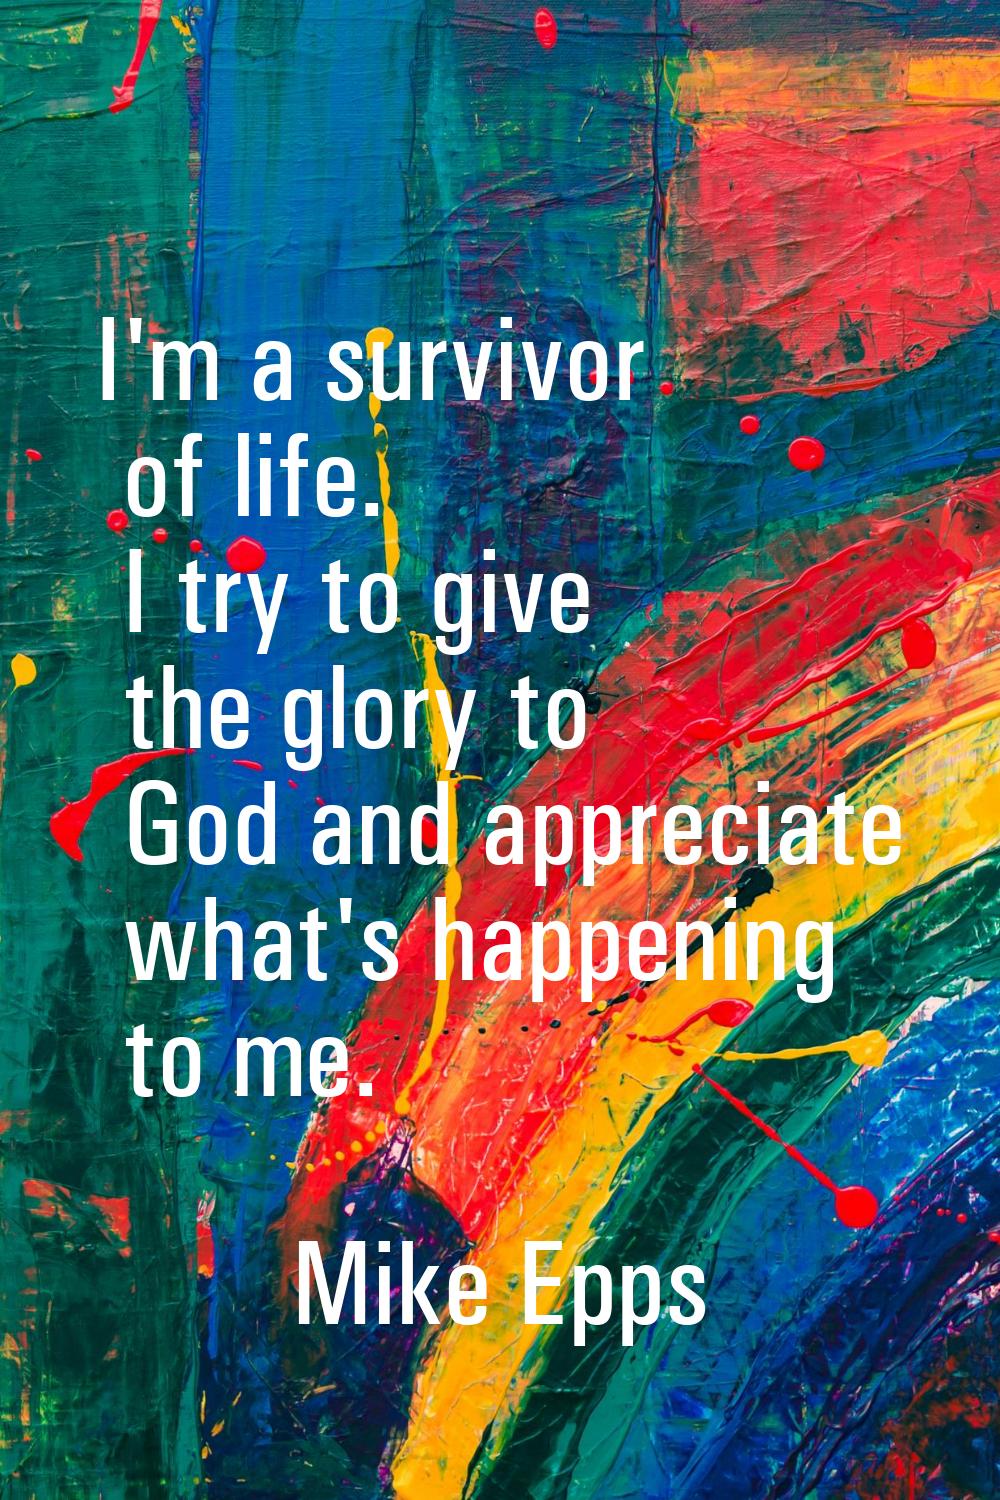 I'm a survivor of life. I try to give the glory to God and appreciate what's happening to me.